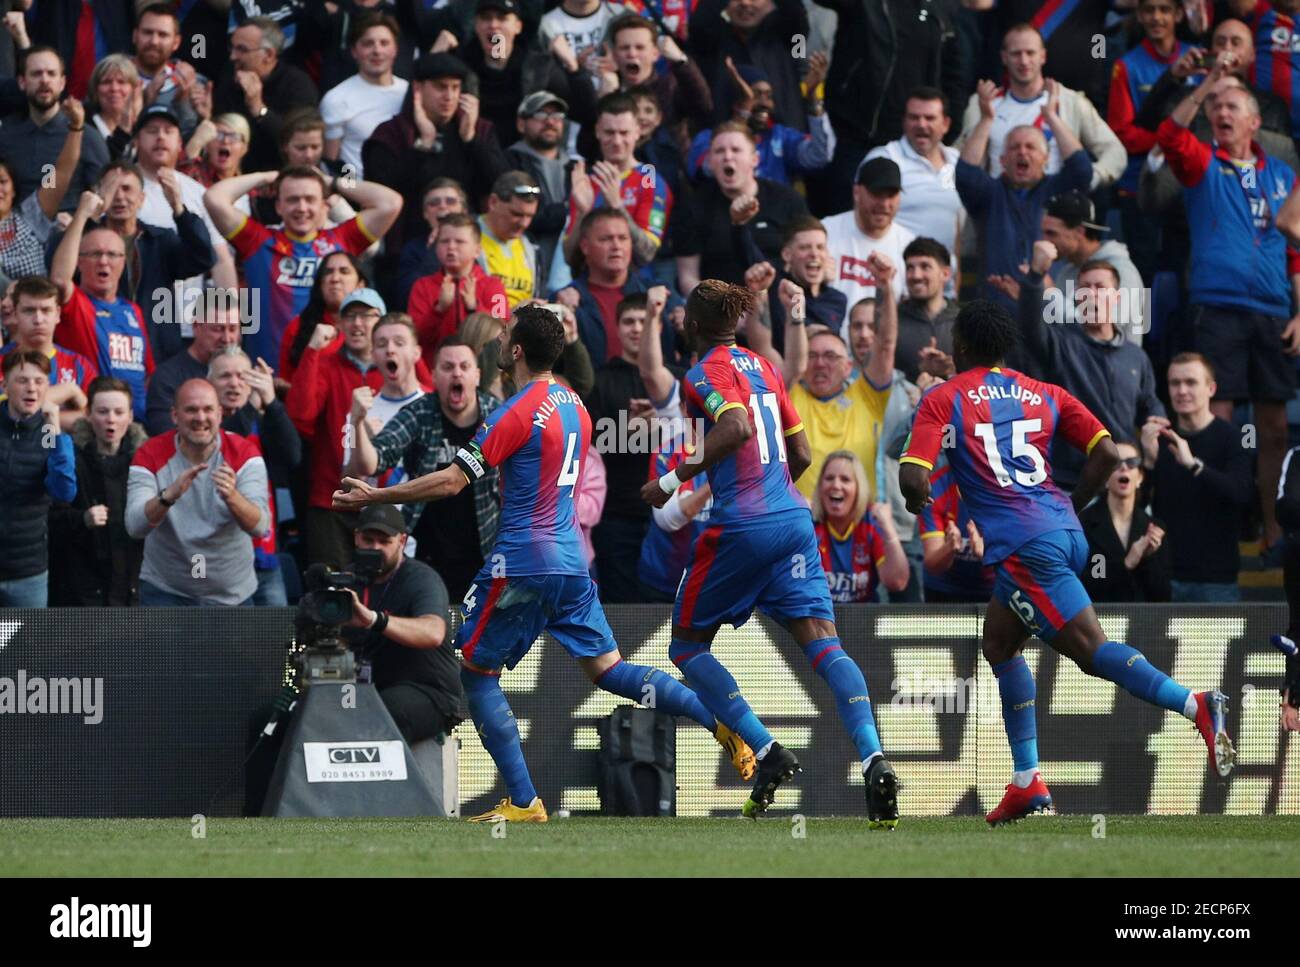 Soccer Football - Premier League - Crystal Palace v Huddersfield Town - Selhurst Park, London, Britain - March 30, 2019  Crystal Palace's Luka Milivojevic celebrates scoring their first goal with team mates     REUTERS/Hannah McKay  EDITORIAL USE ONLY. No use with unauthorized audio, video, data, fixture lists, club/league logos or 'live' services. Online in-match use limited to 75 images, no video emulation. No use in betting, games or single club/league/player publications.  Please contact your account representative for further details. Stock Photo